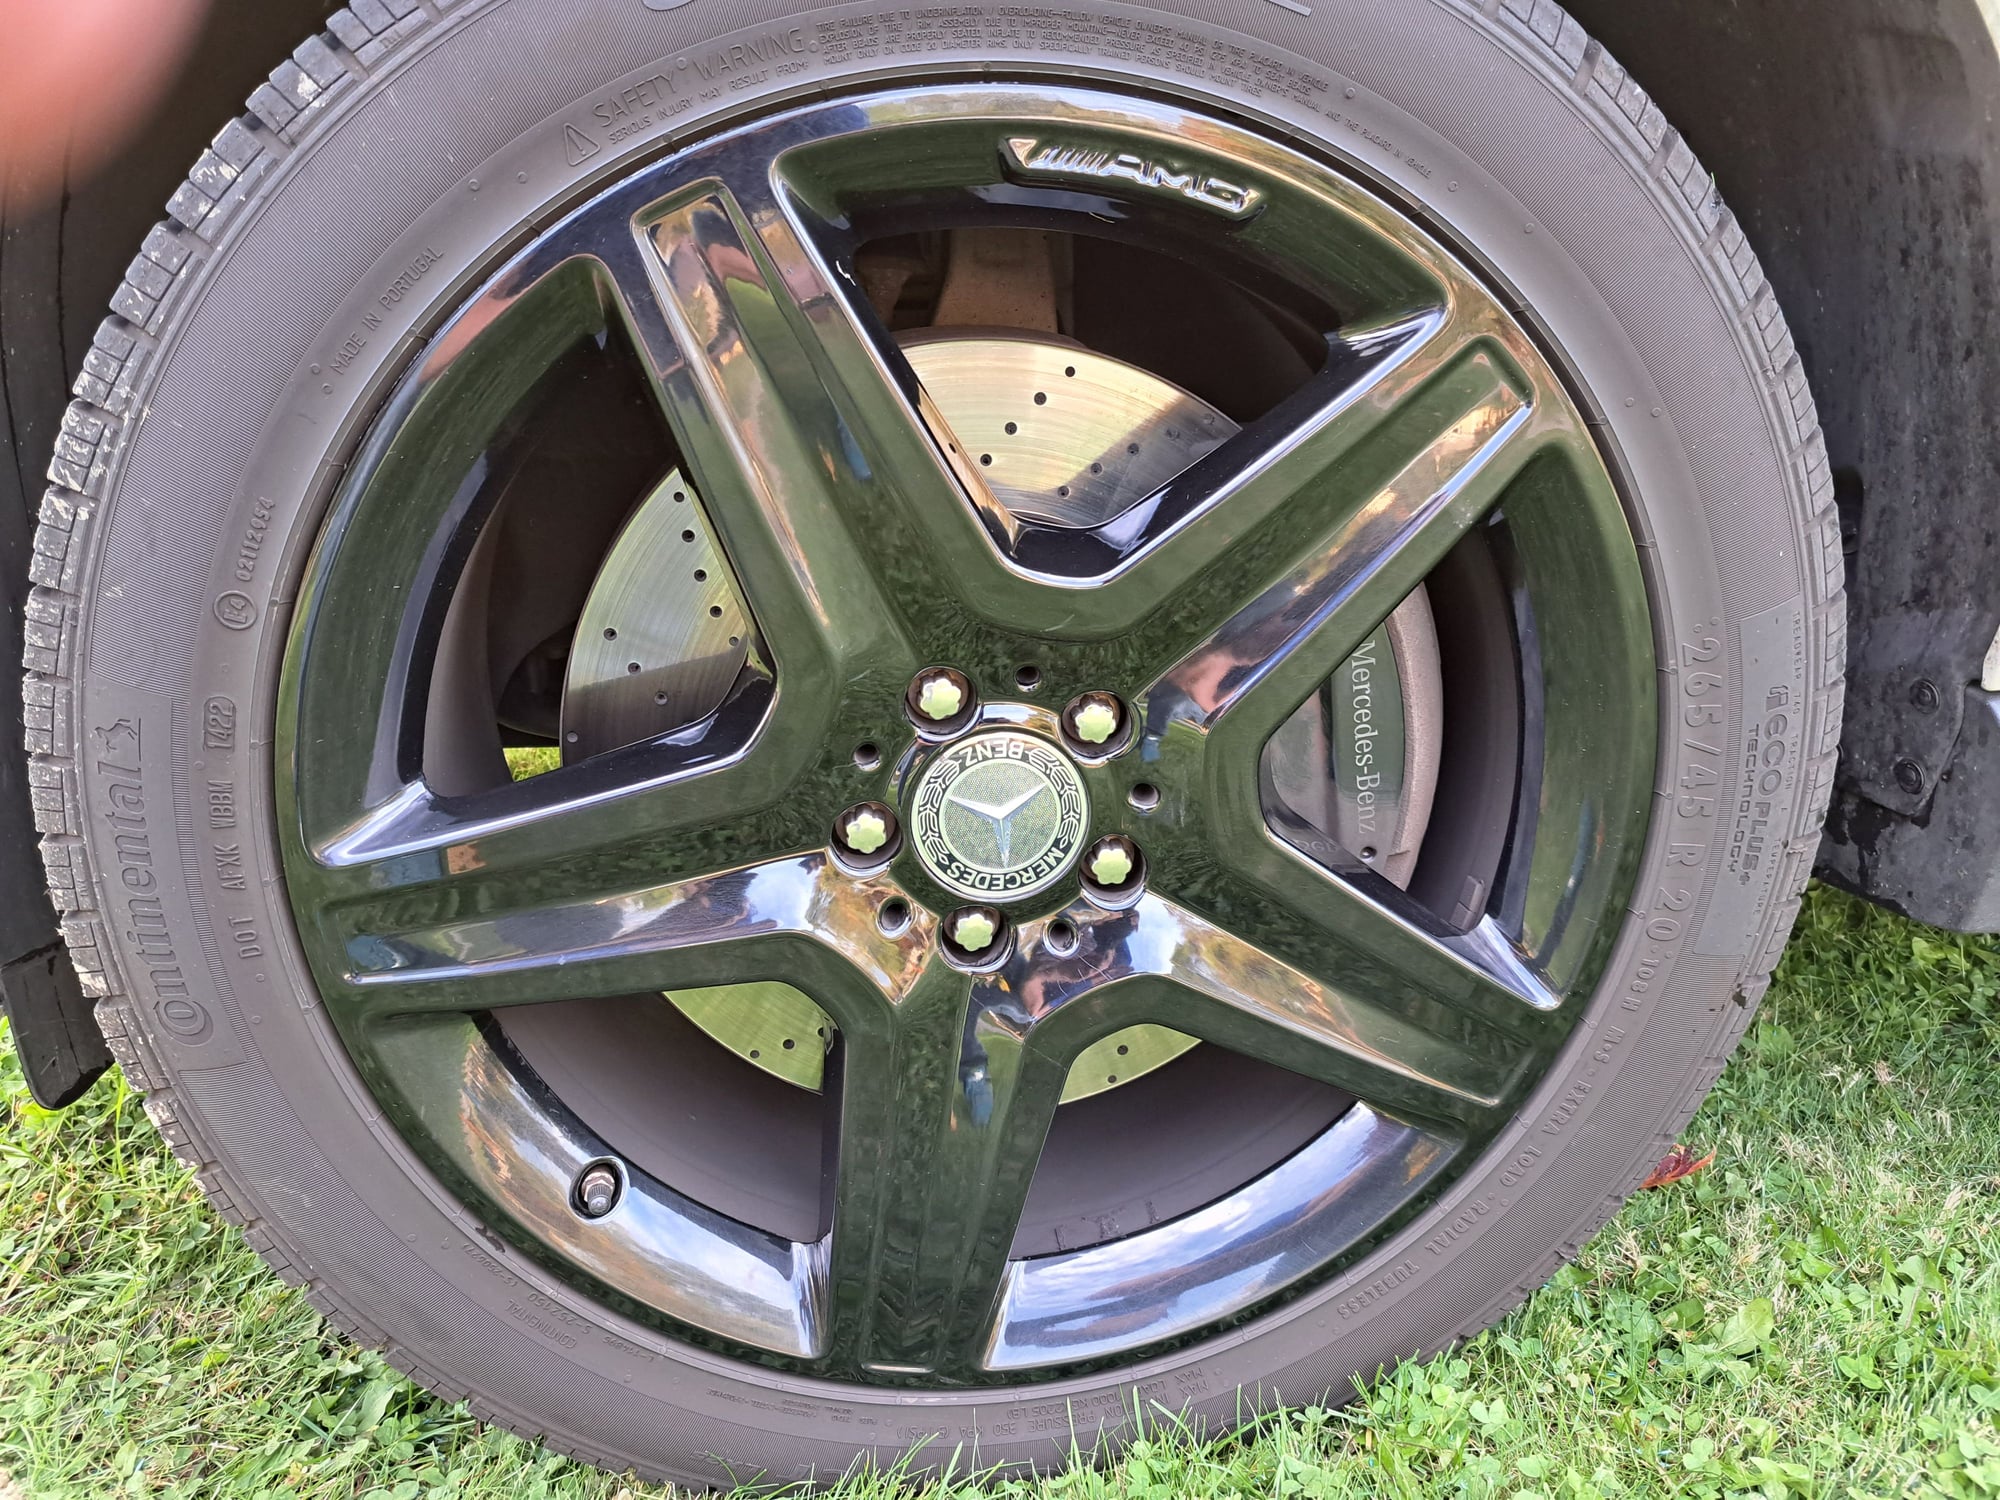 Wheels and Tires/Axles - 20 inch Mercedes AMG Wheels Black. Excellent Condition.  ML GLE GLS Other Models - Used - 2012 to 2018 Mercedes-Benz ML63 AMG - 2016 to 2019 Mercedes-Benz GLE63 AMG - 2012 to 2019 Mercedes-Benz GLS550 - Cleveland, OH 44145, United States